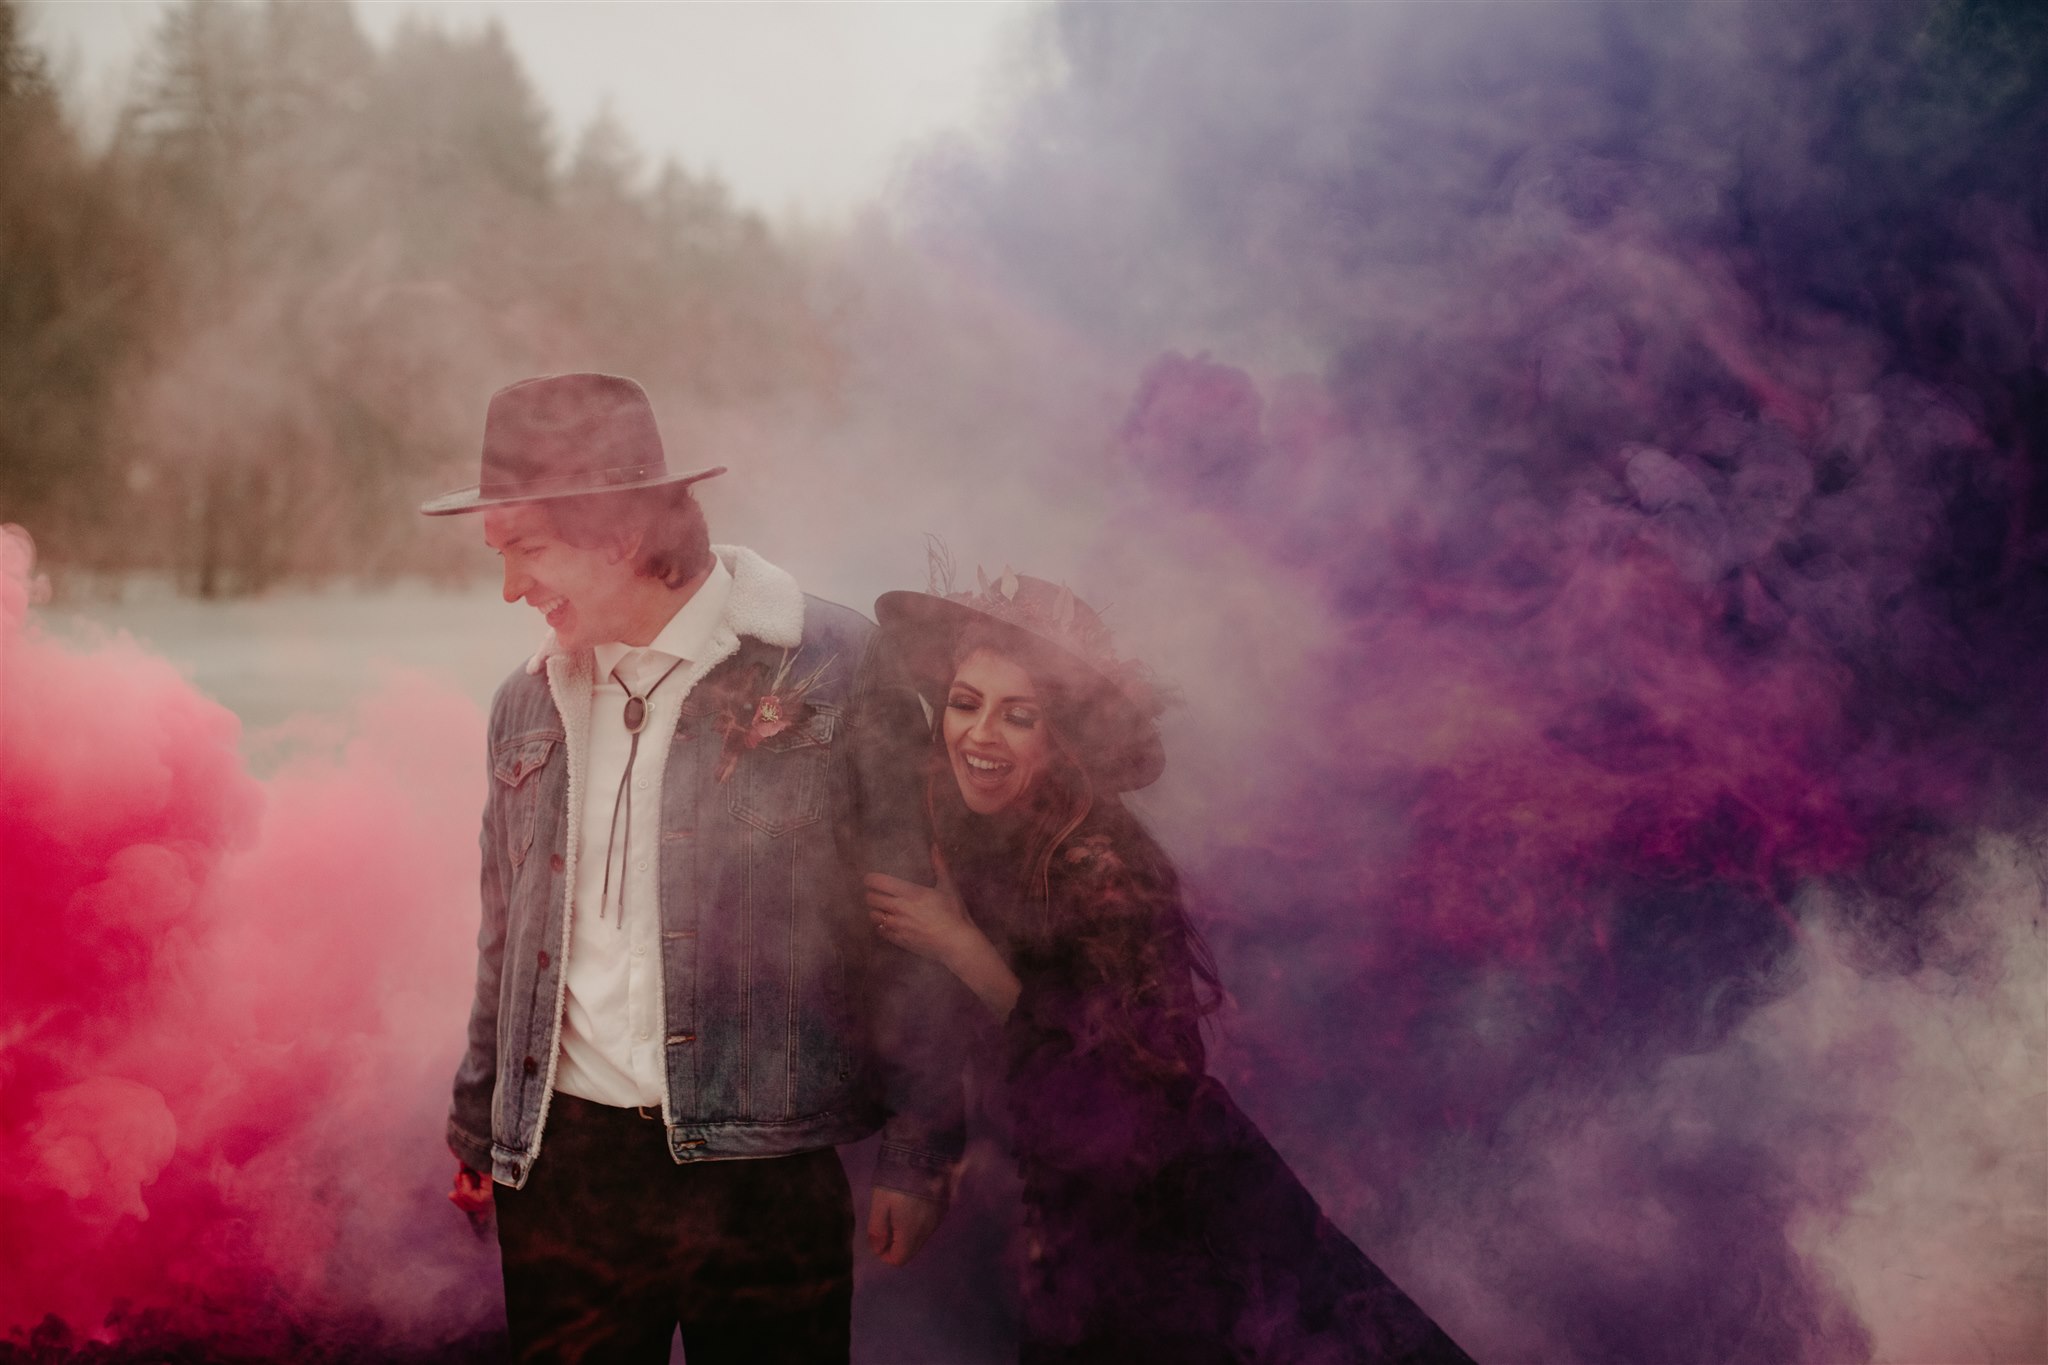 Boho chic bride in furry jacket and groom in jean jacket on snowy river bank with coloured purple and red smoke